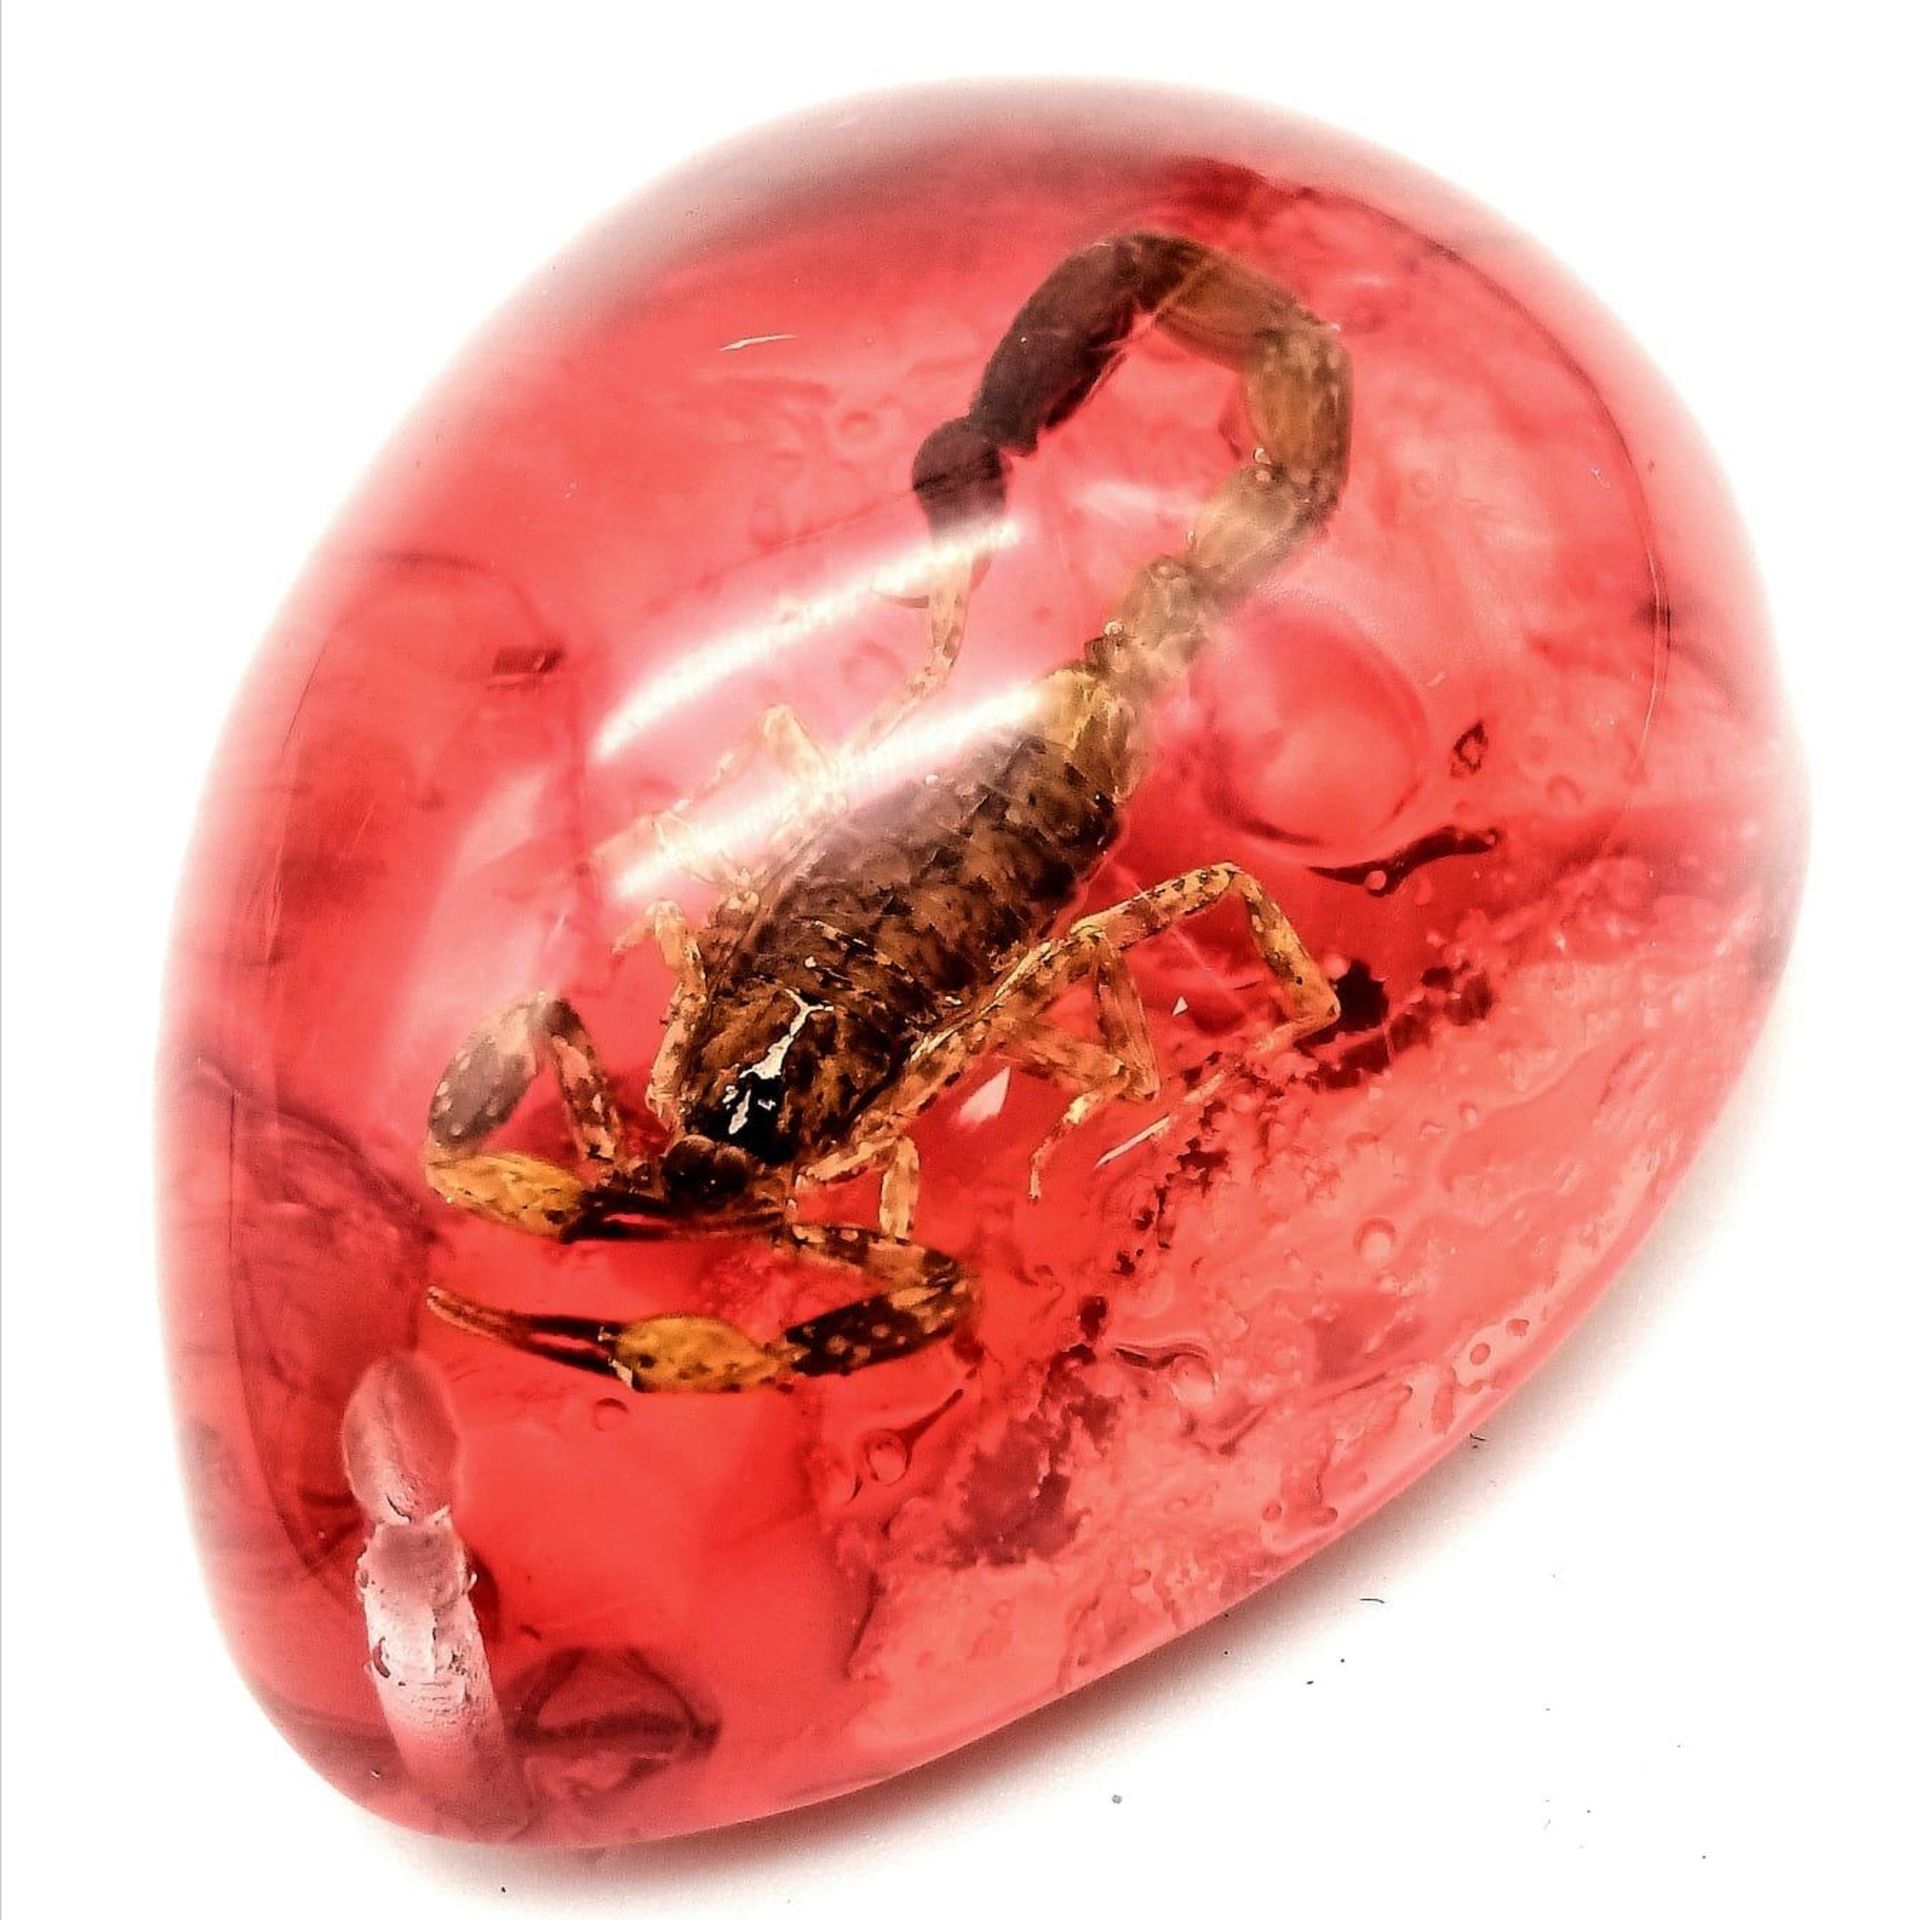 A Scorpion Ready to Strike - Unfortunately Now Frozen Forever in a Red Hellish Resin Prison. Pendant